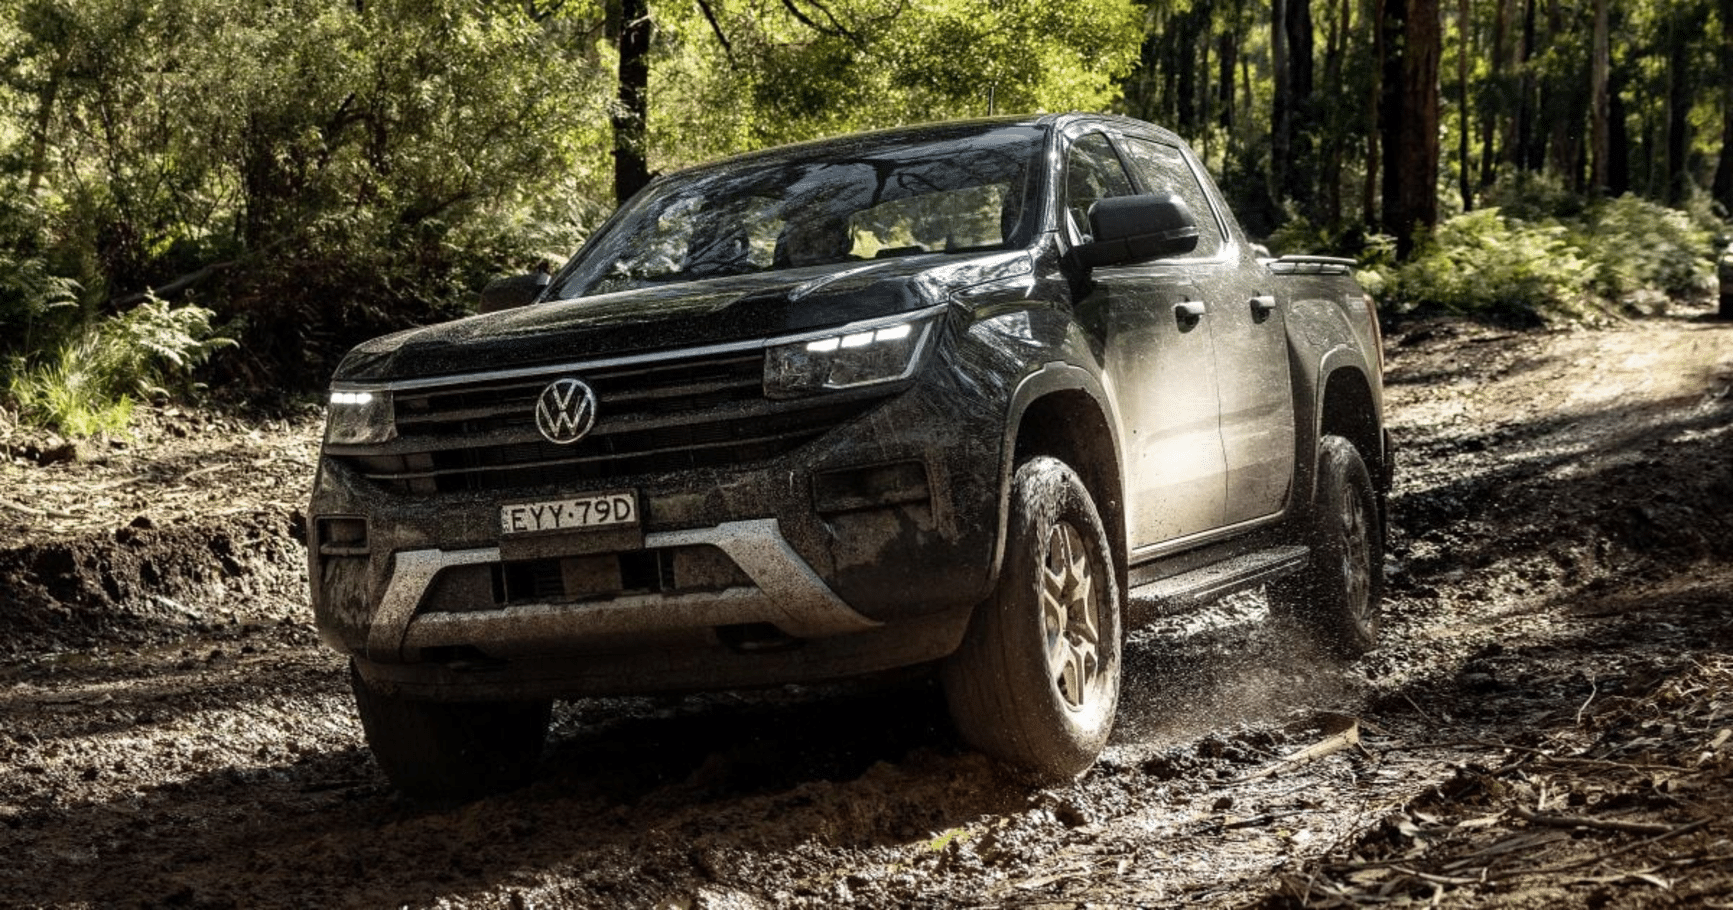 The Future of the Volkswagen Amarok: Will We See an Electrified Version?